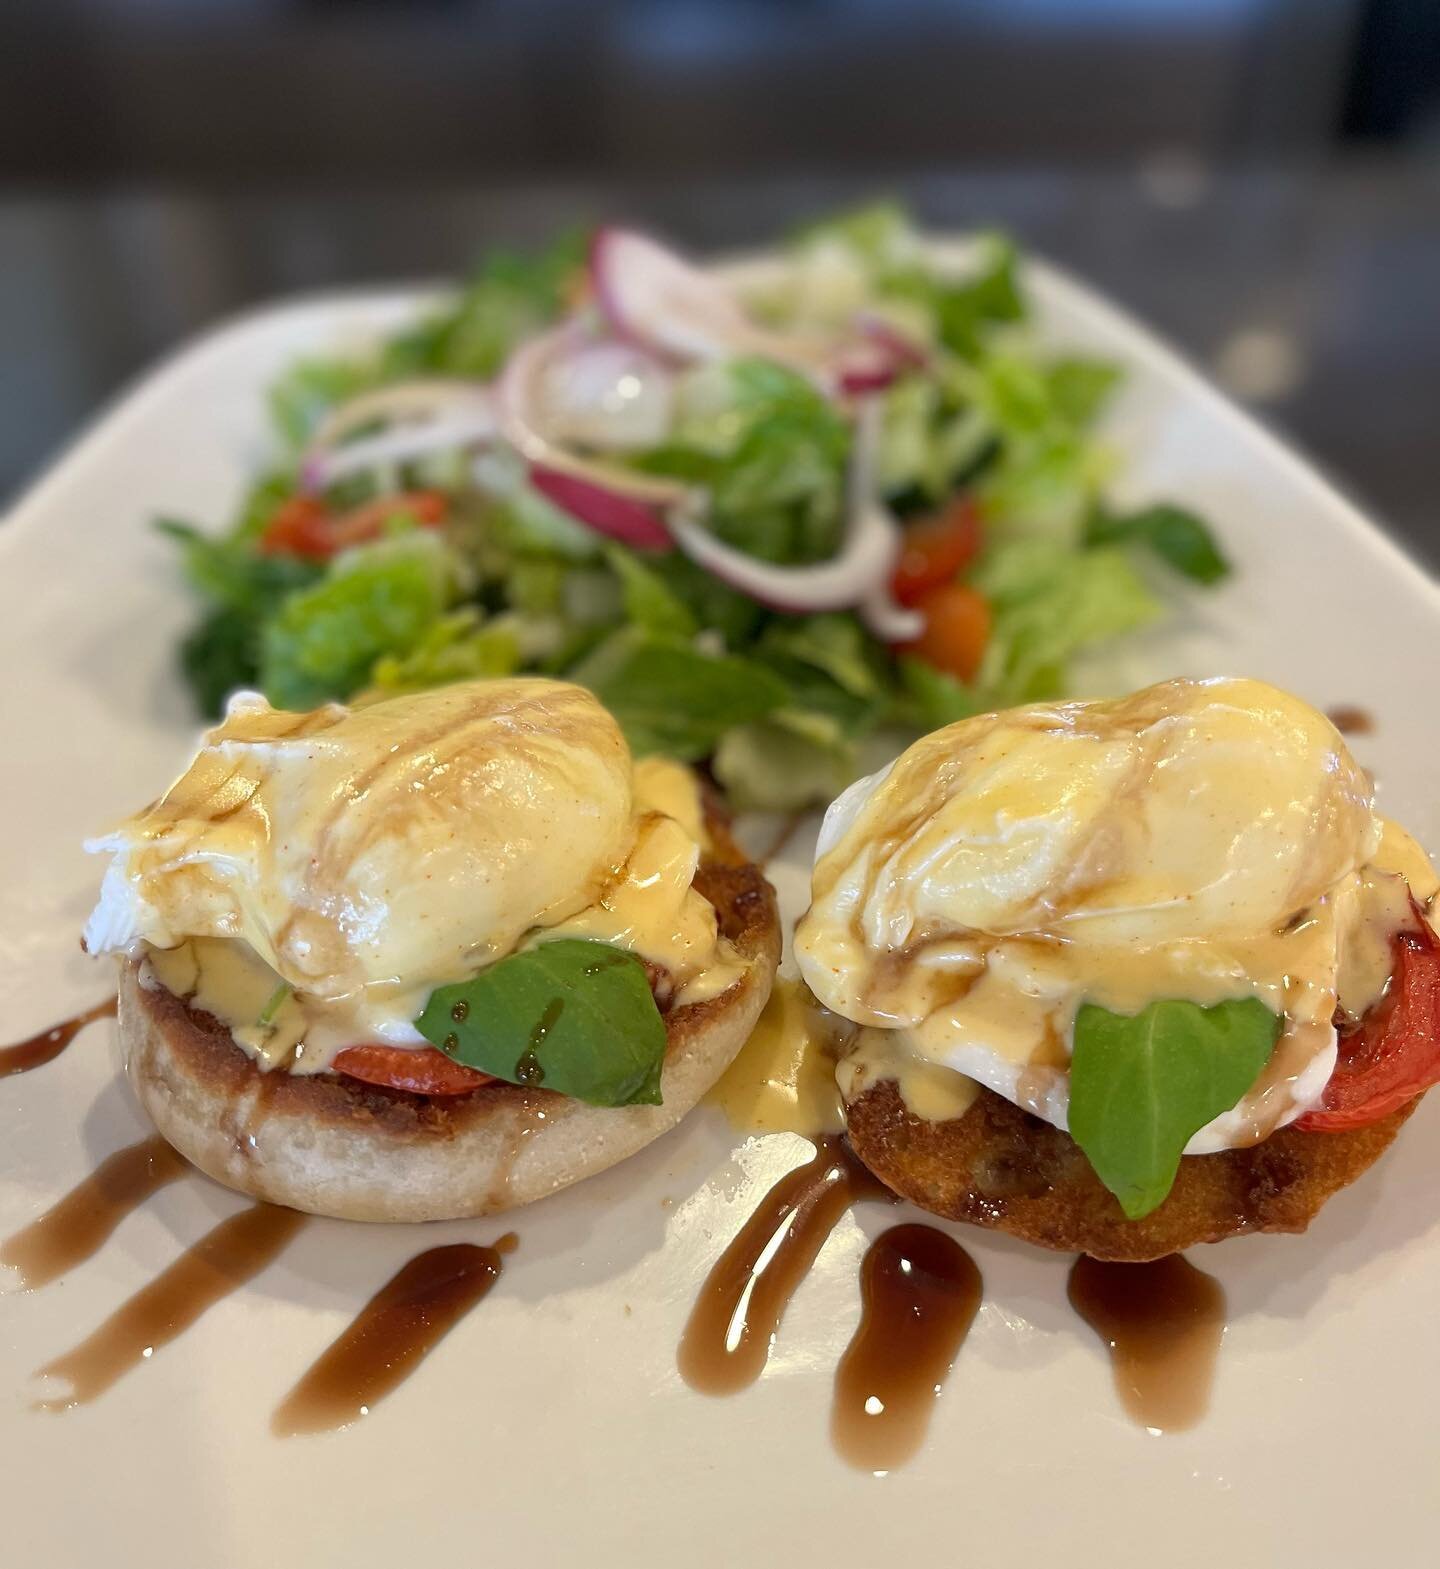 THIS  WEEKENDS  SPECIAL!!
&bull;Caprese Eggs Benedict&bull;😋
Fresh Mozzarella, Roasted Tomato, Basil and Two Poached Eggs on a Thomas&rsquo; English Muffin topped with our House-made Hollandaise Sauce  and a Balsamic Reduction drizzle. Served with a